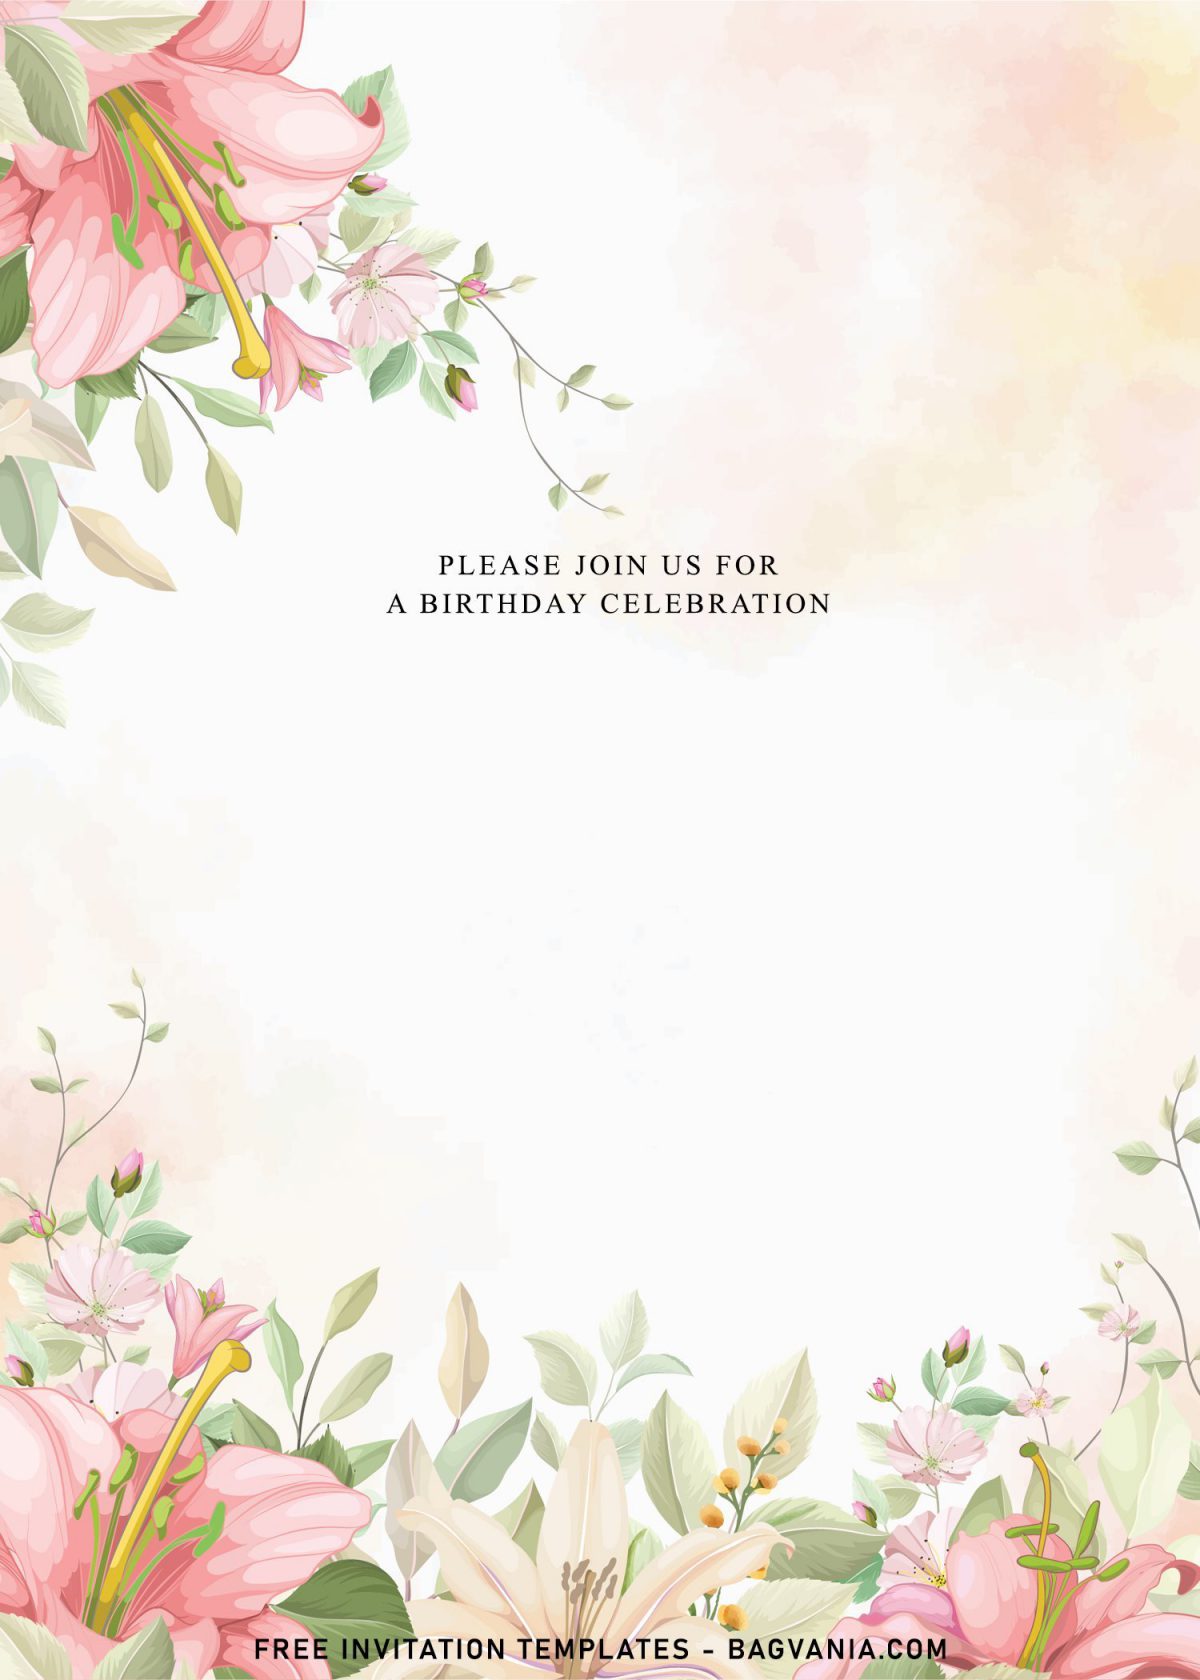 7+ Watercolor Eucalyptus Floral Birthday Invitation Templates and has Watercolor background